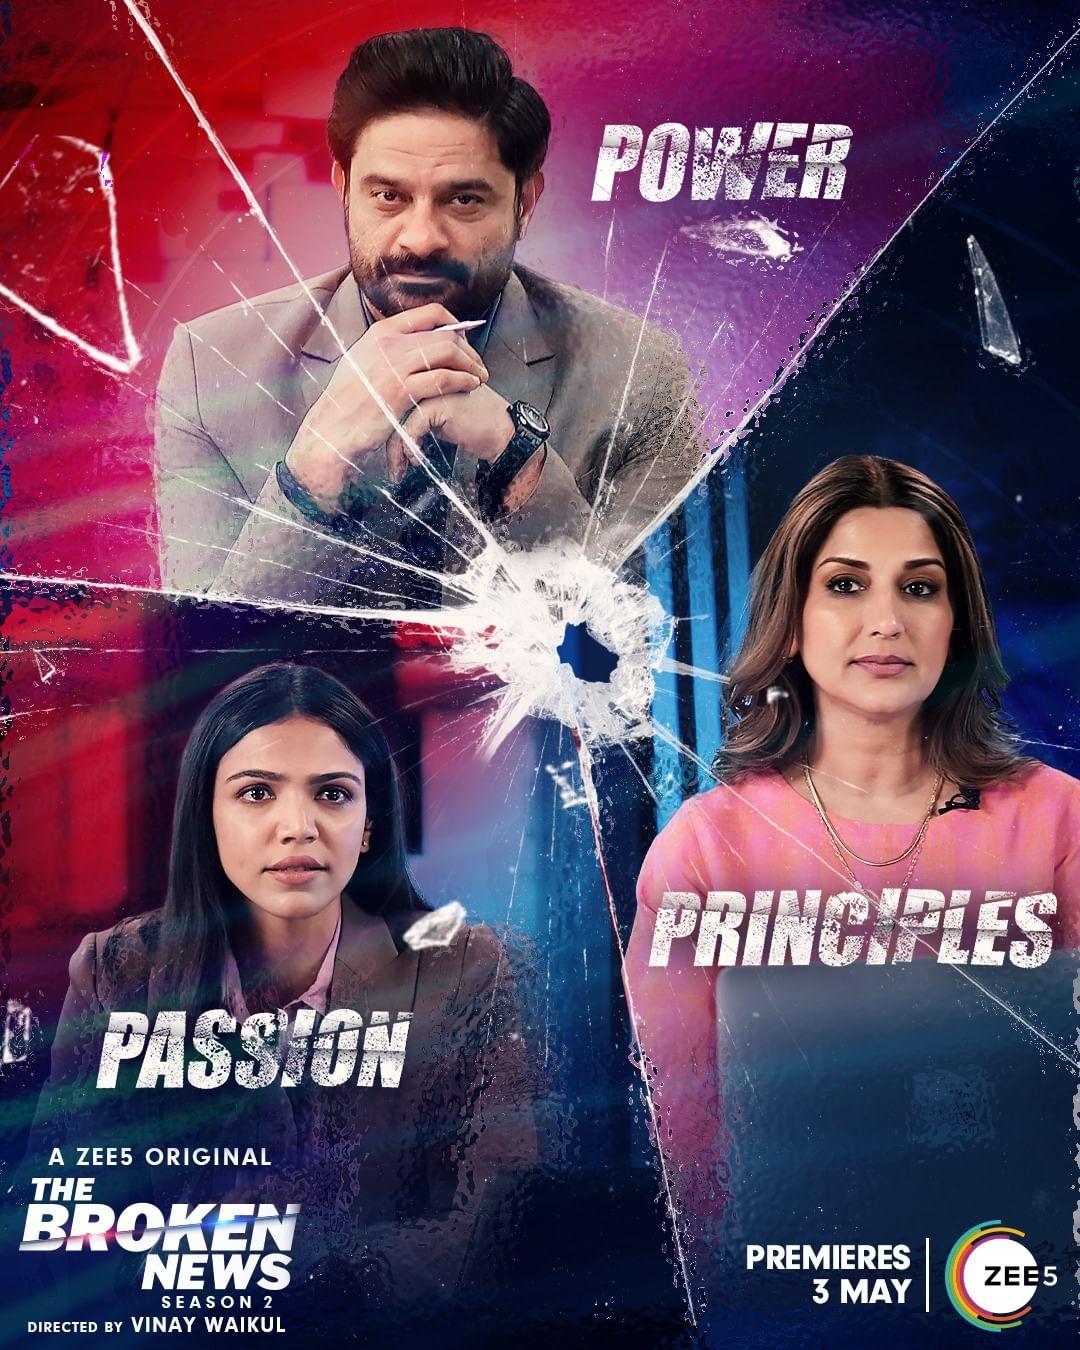 The Broken News (Streaming on Zee 5) - May 3In the finale of the first season of The Broken News, Radha was falsely accused of terrorism and imprisoned. But in the upcoming second season, Radha is on a mission to seek revenge against Dipankar. The Broken News 2 will explore themes of sensationalist journalism, ratings wars, politics, and crime.